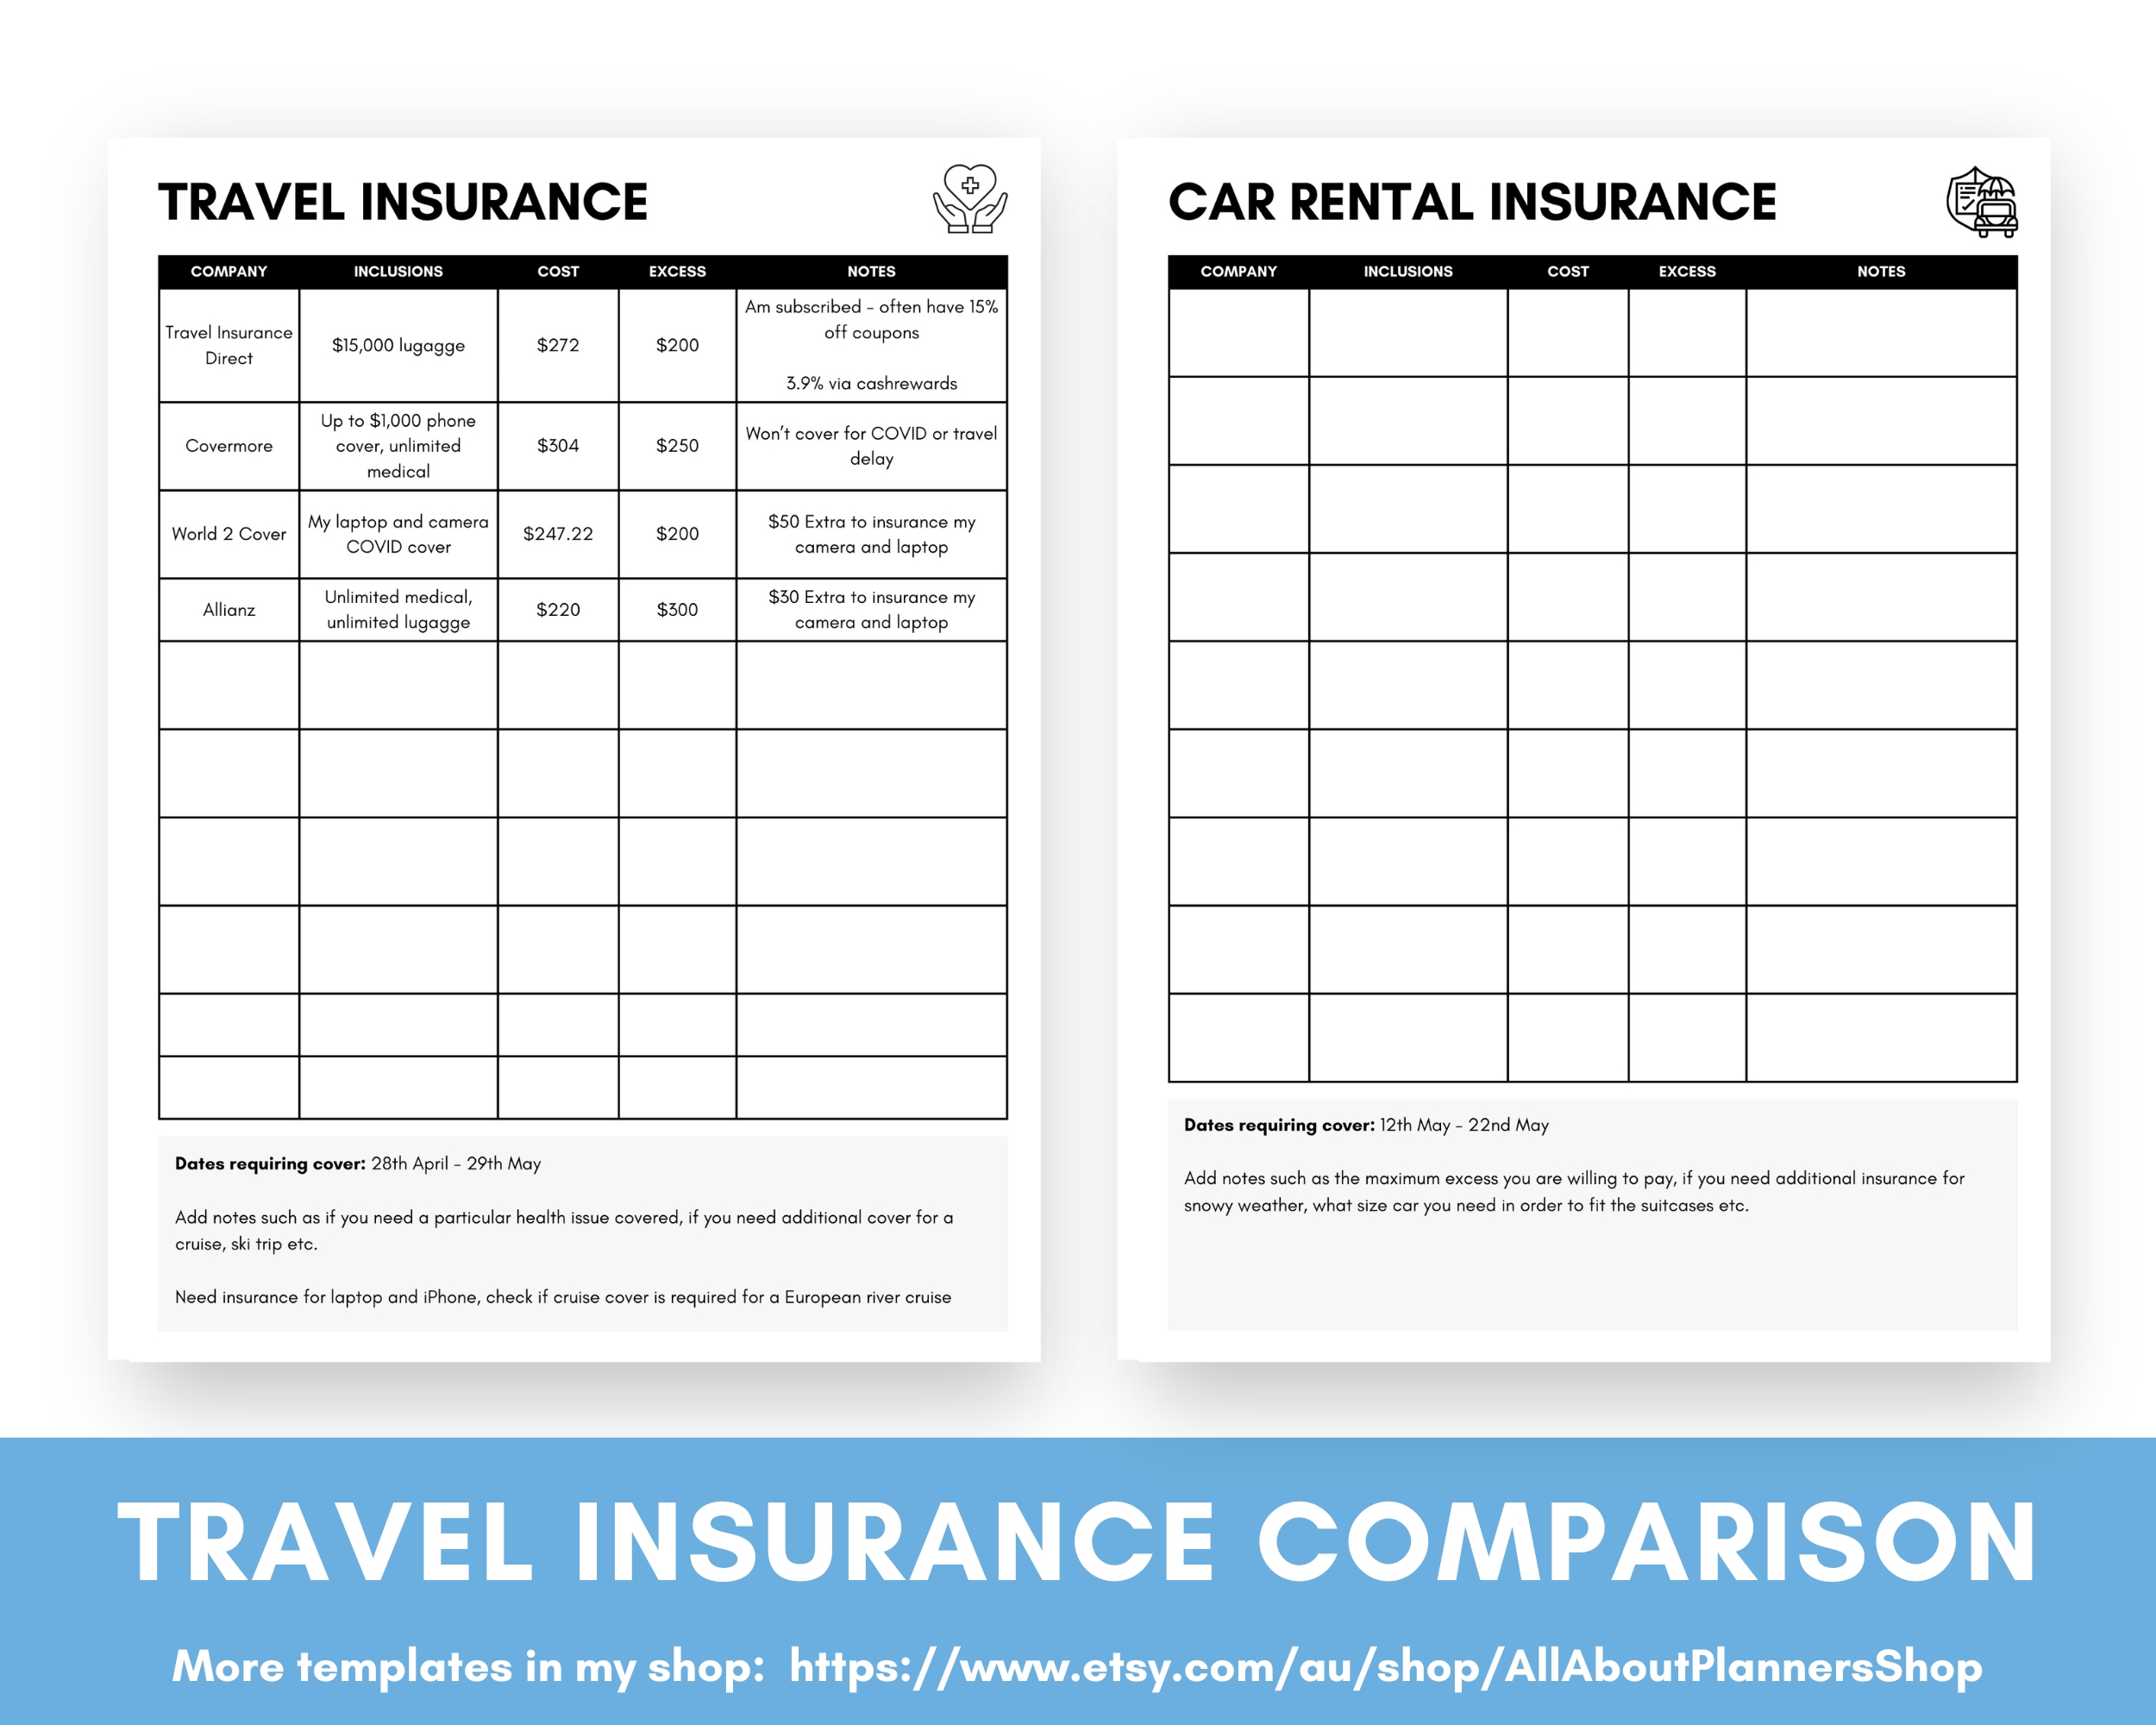 Travel insurance comparison template printable editable in canva customisable car rental simple easy to use